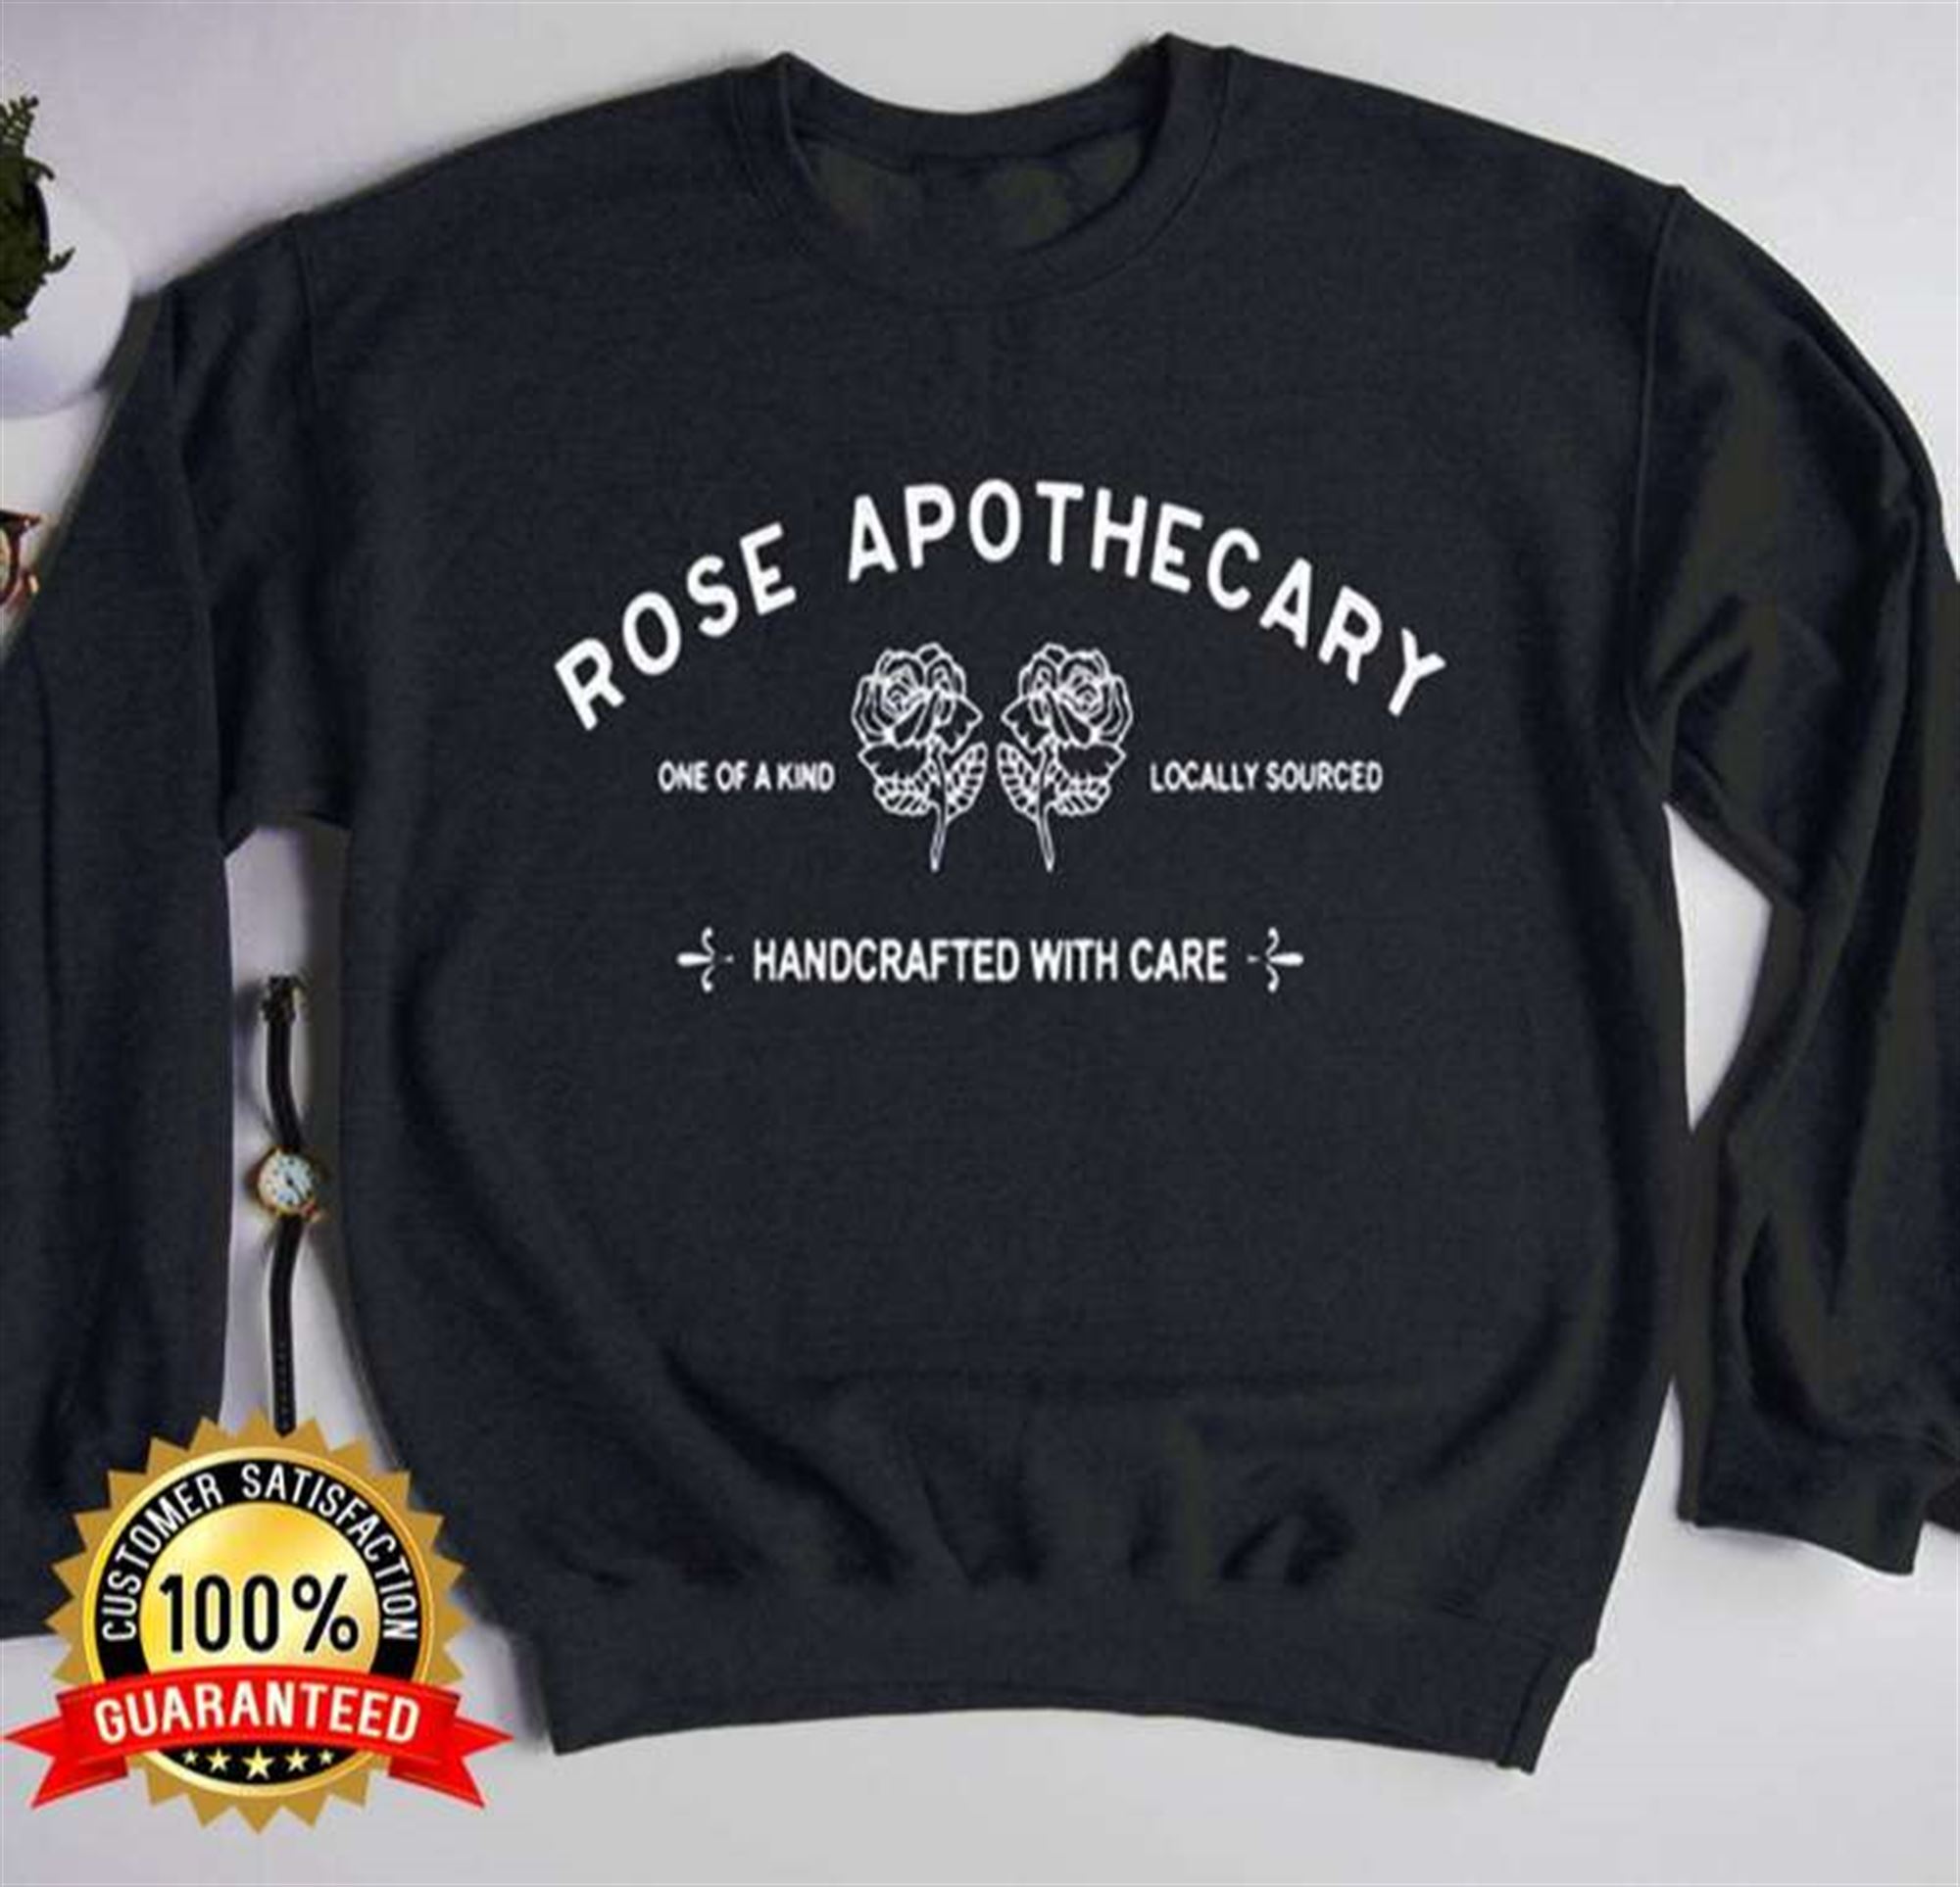 Rose Apothecary Sweatshirt T Shirt Size Up To 5xl